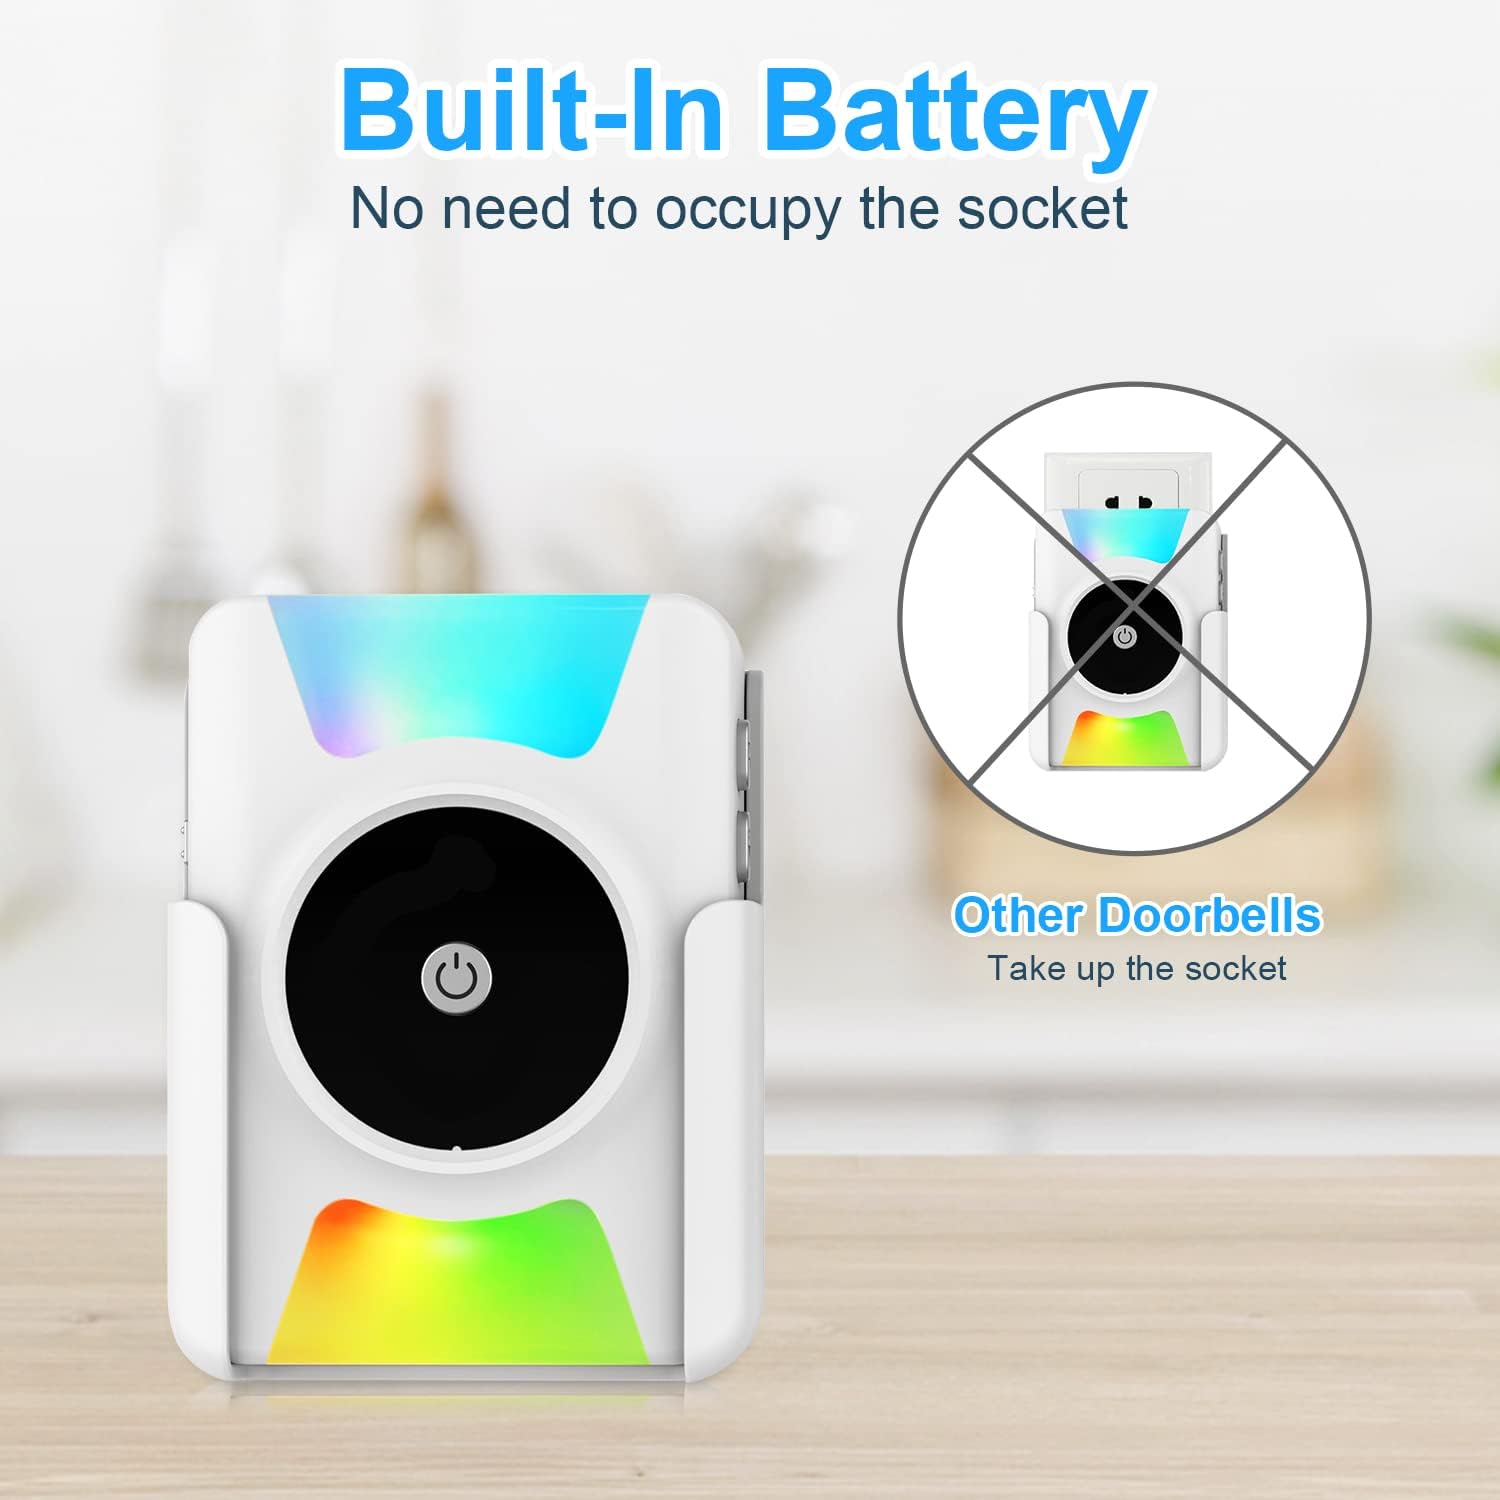 CallToU Portable Battery-powered Vibrating Receiver with Flashing LED